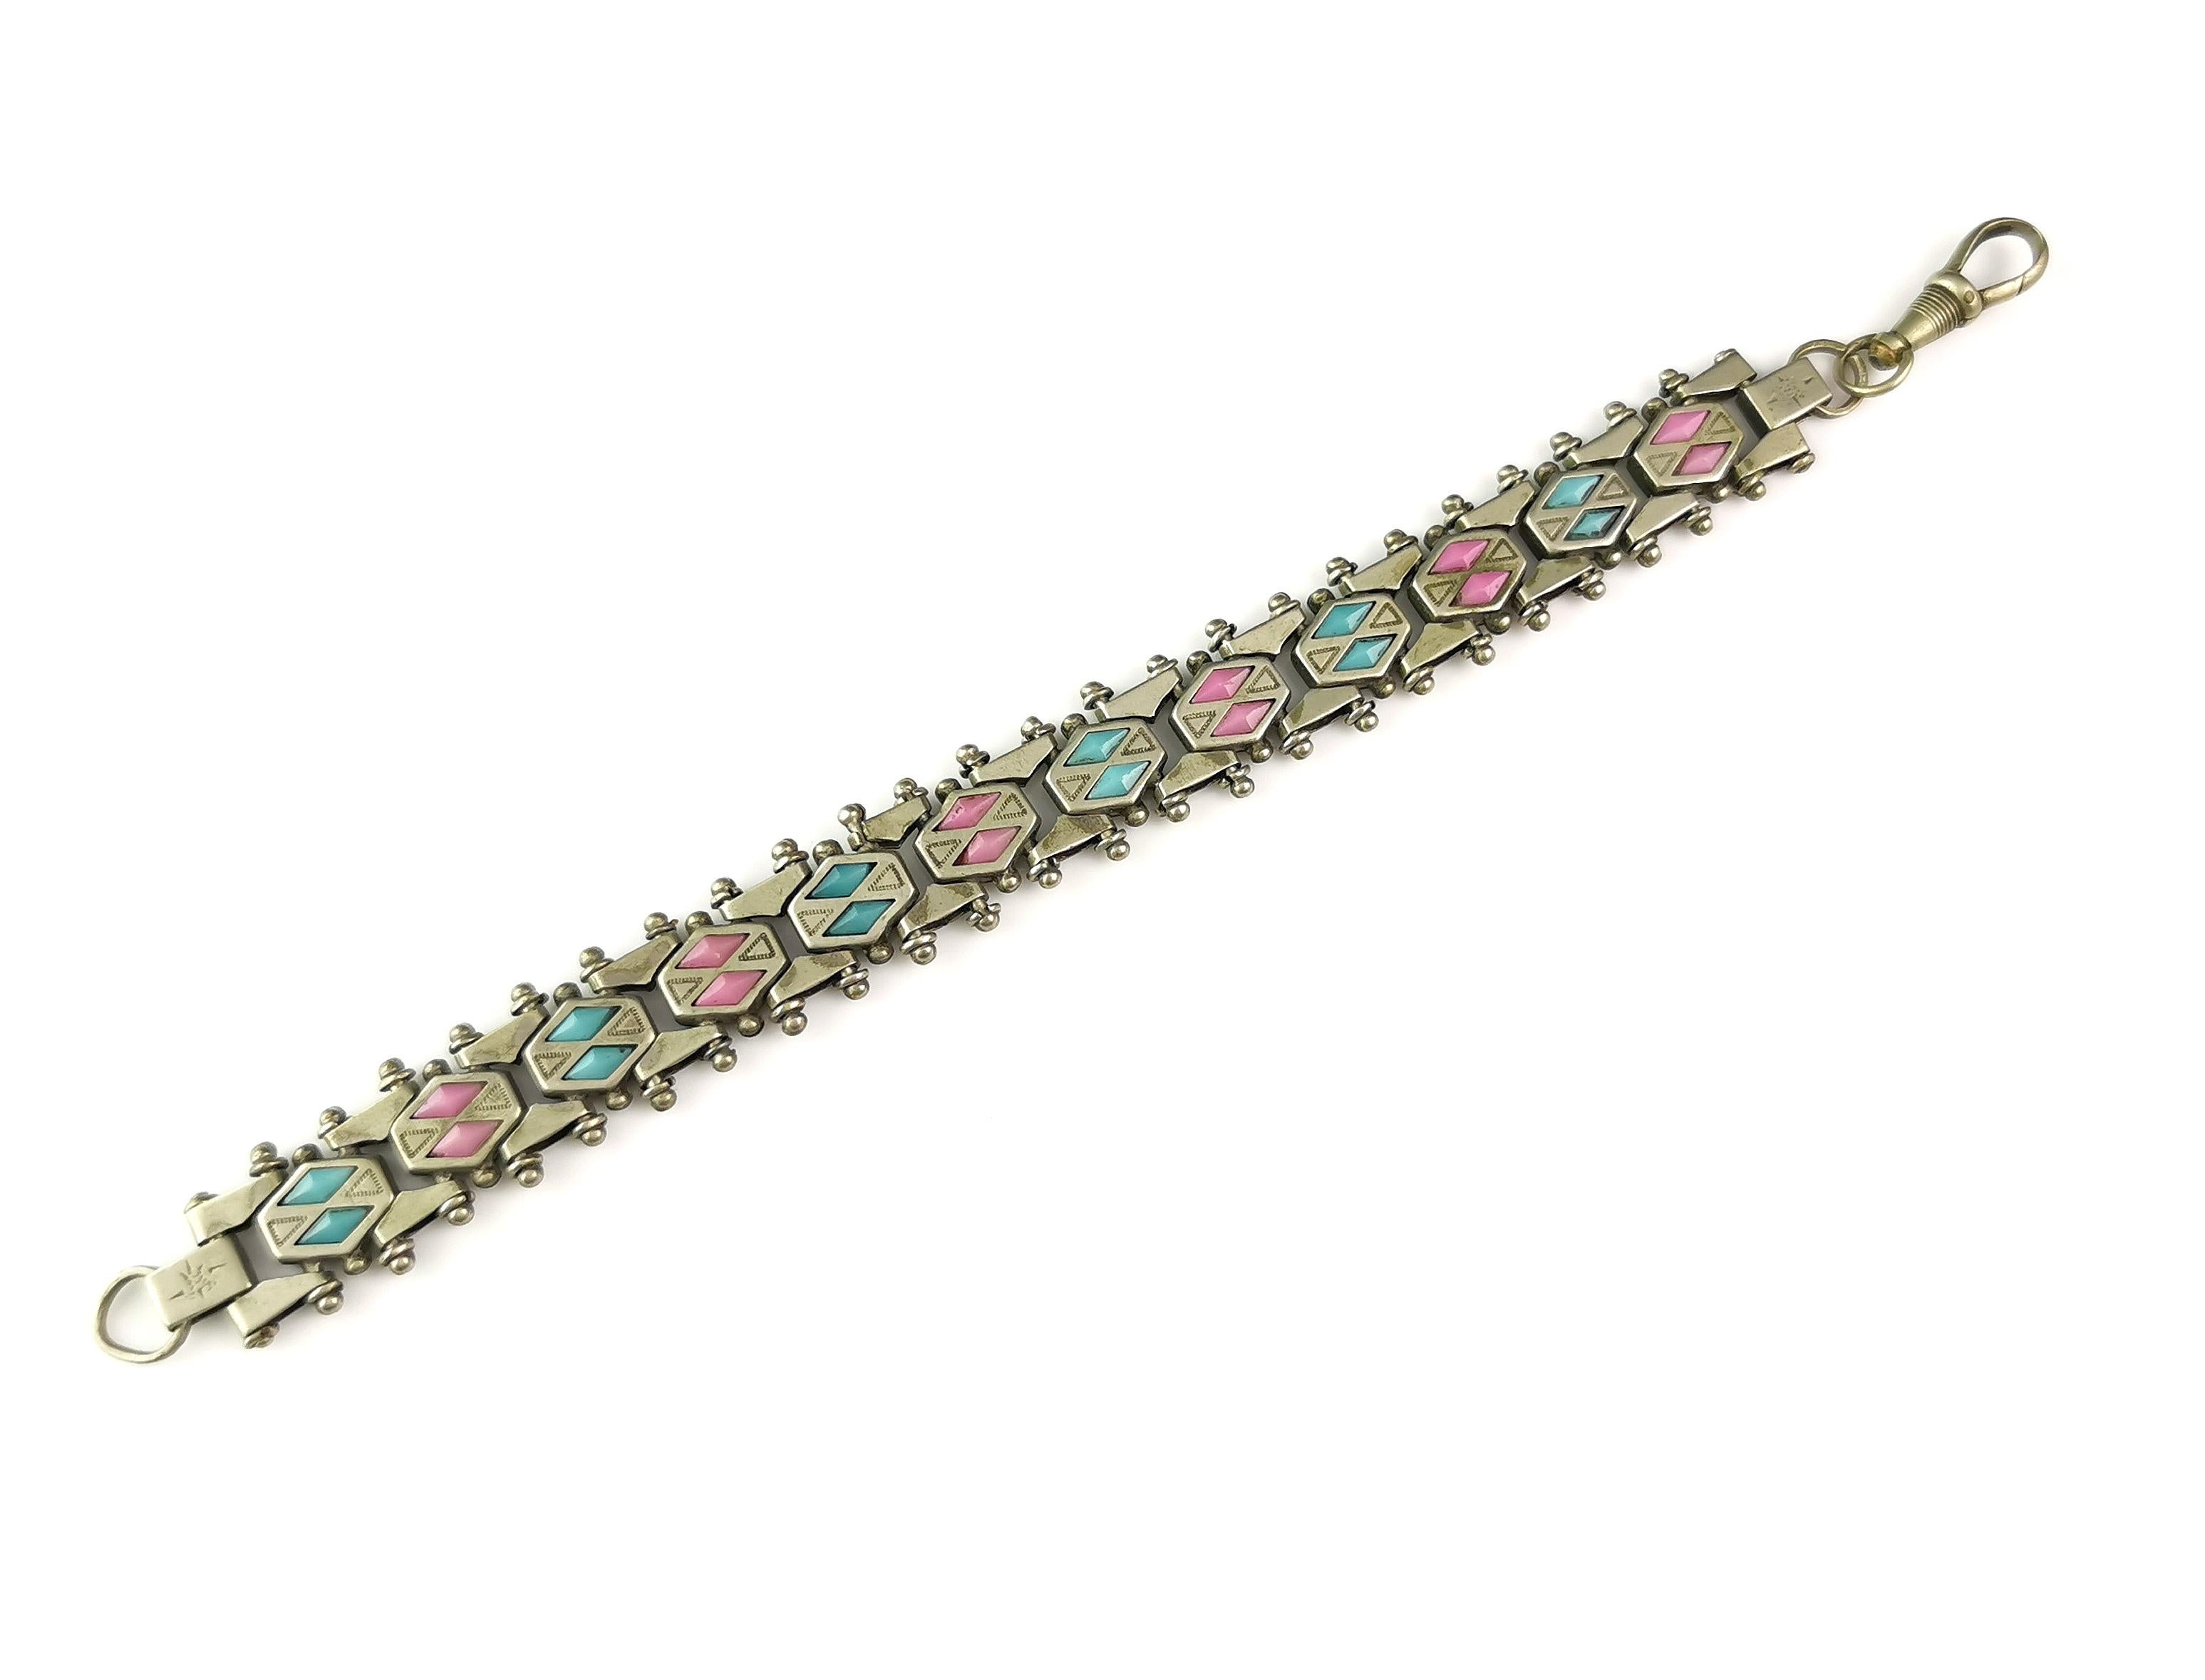 A gorgeous and unusual antique fancy link bracelet.

It is quite a chunky bracelet with fancy book chain style links each intercepted with baby pink and blue paste.

The light pastel shades contrast well with the chunky links.

It fastens with a dog